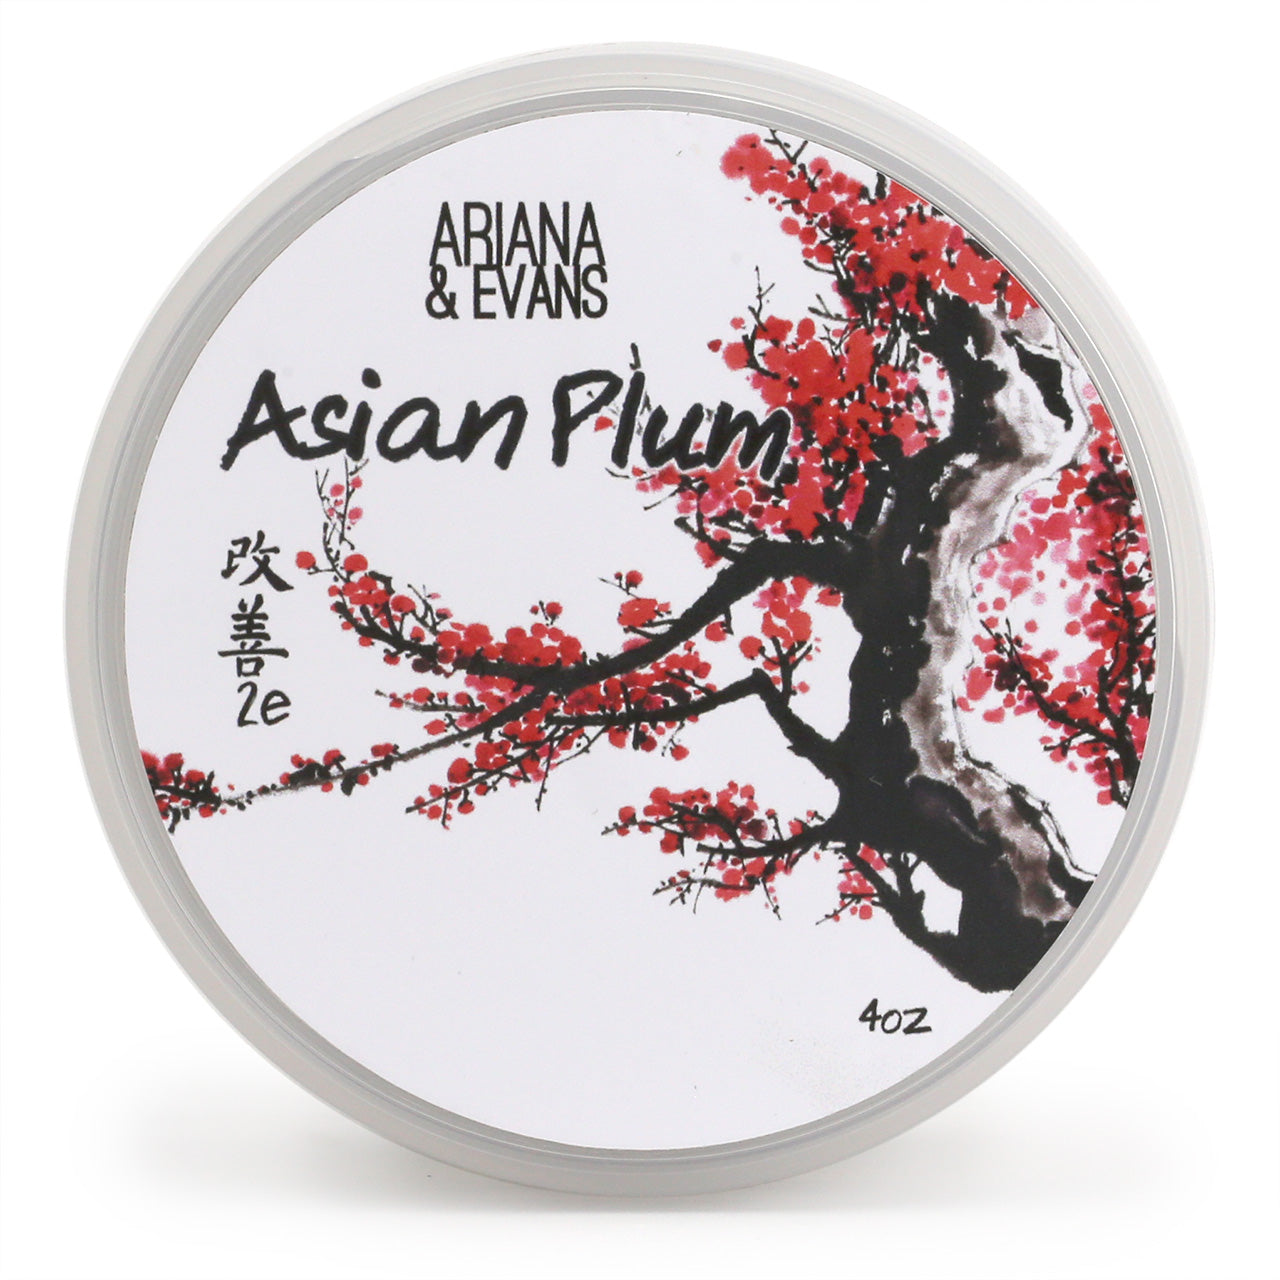 Asian Plum Shaving Soap showing the top label with a Japanese brush drawing of a blossoming plum tree